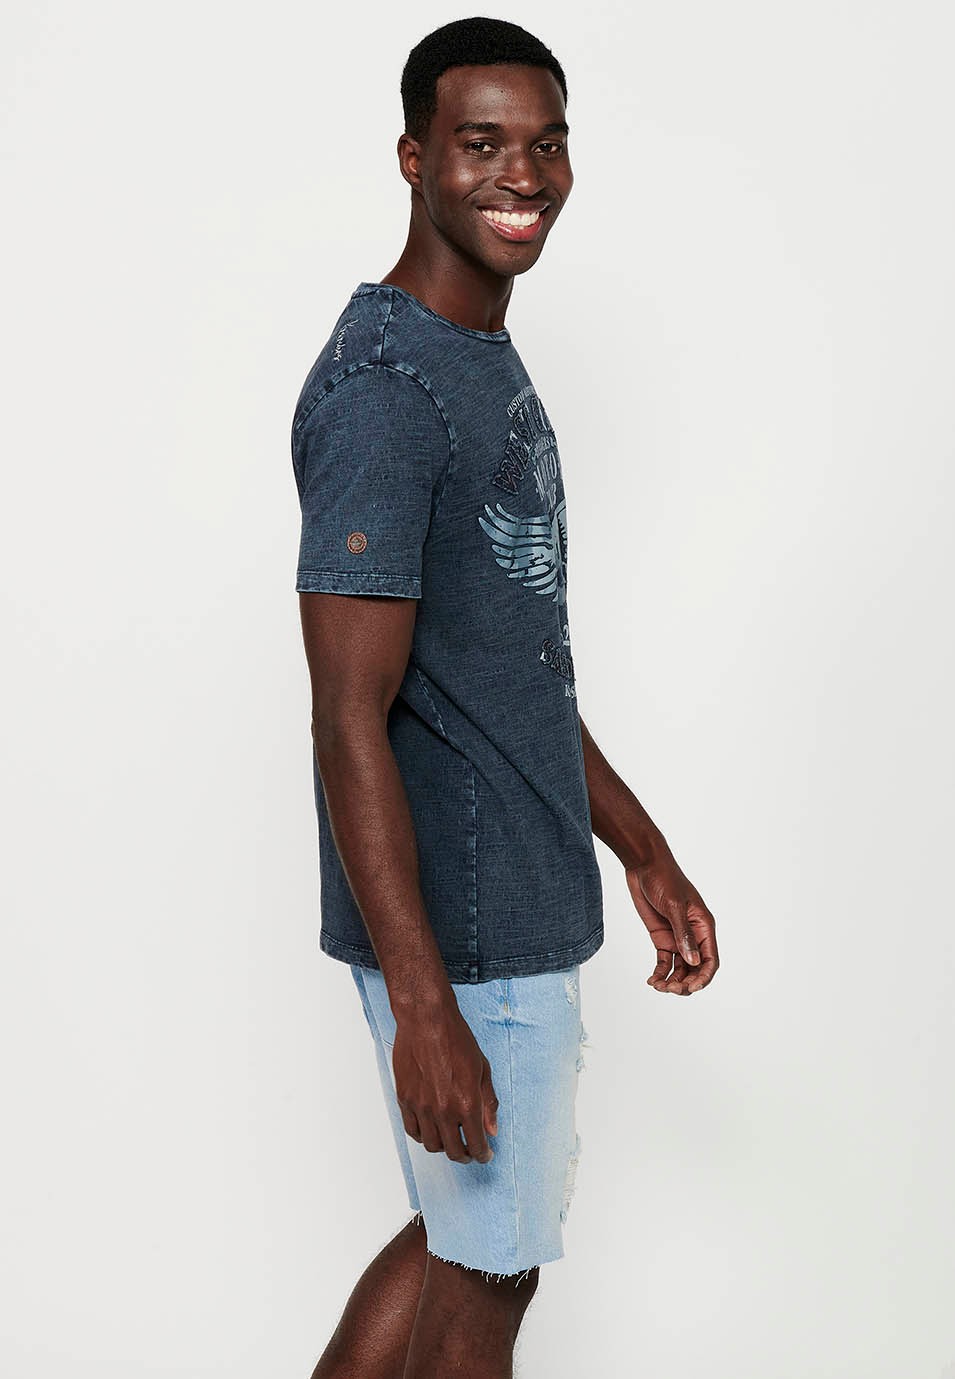 Short-sleeved T-shirt, front print and round neck, blue color for men